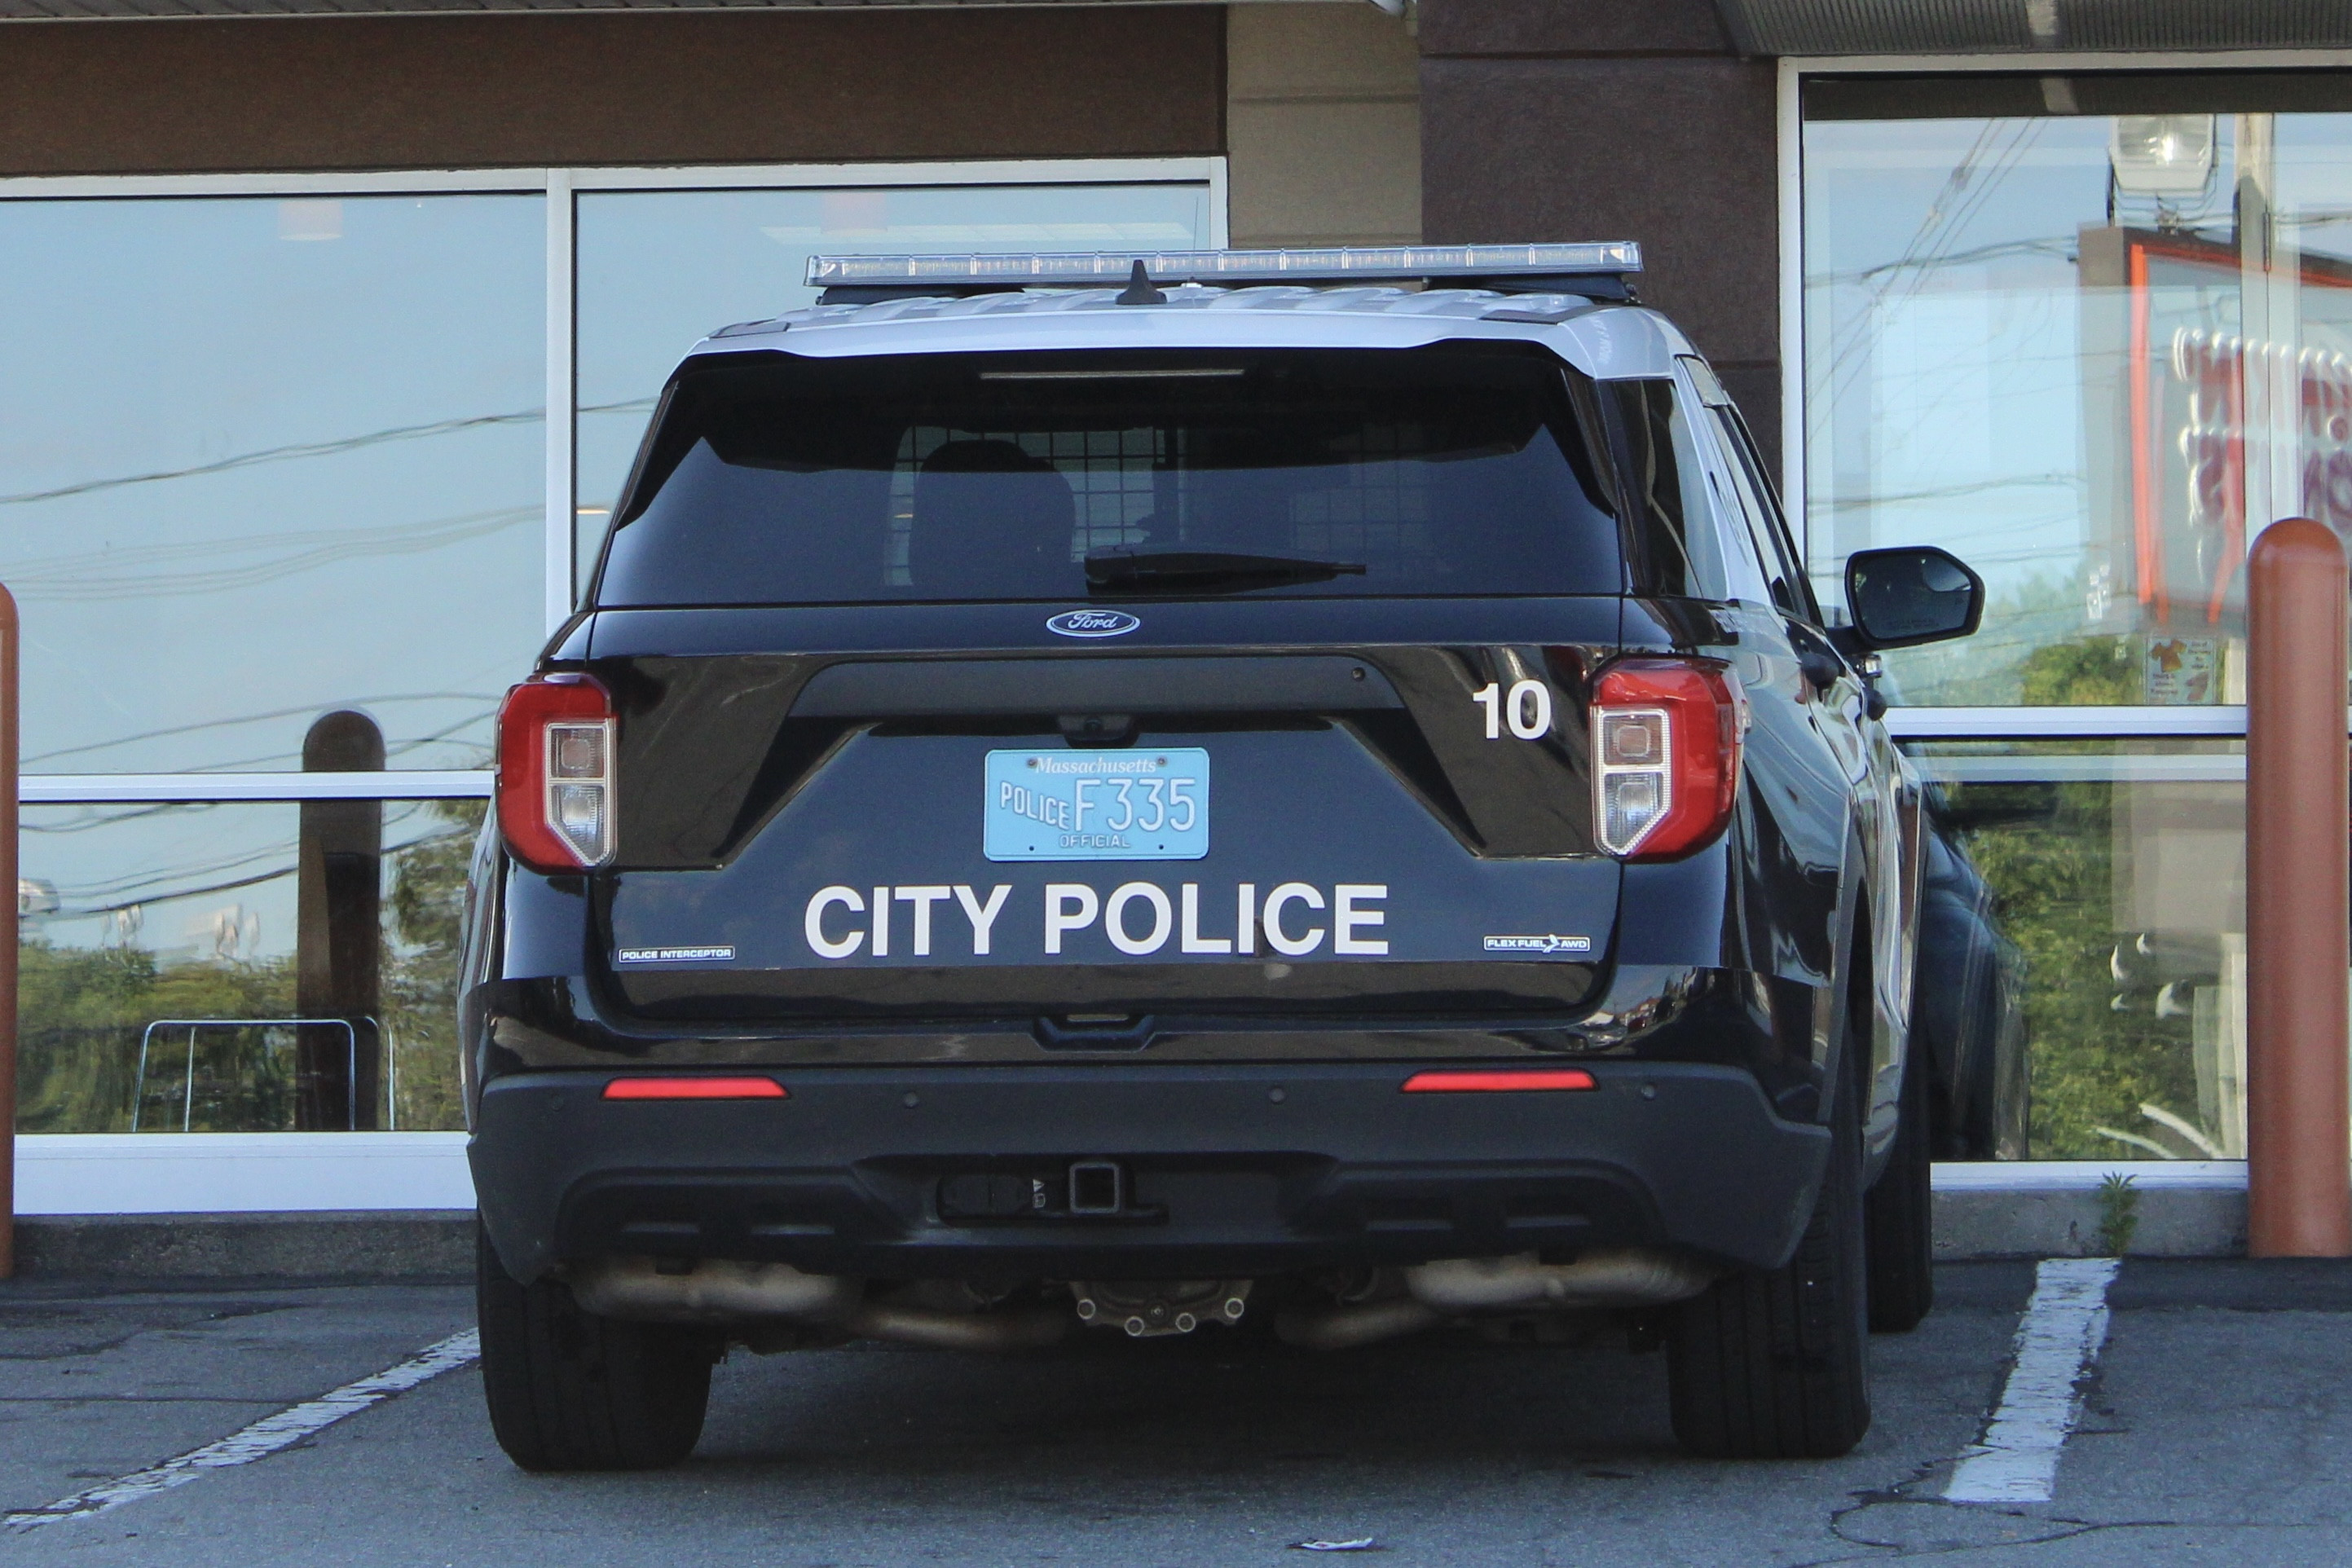 A photo  of Fall River Police
            Car 10, a 2021 Ford Police Interceptor Utility             taken by @riemergencyvehicles